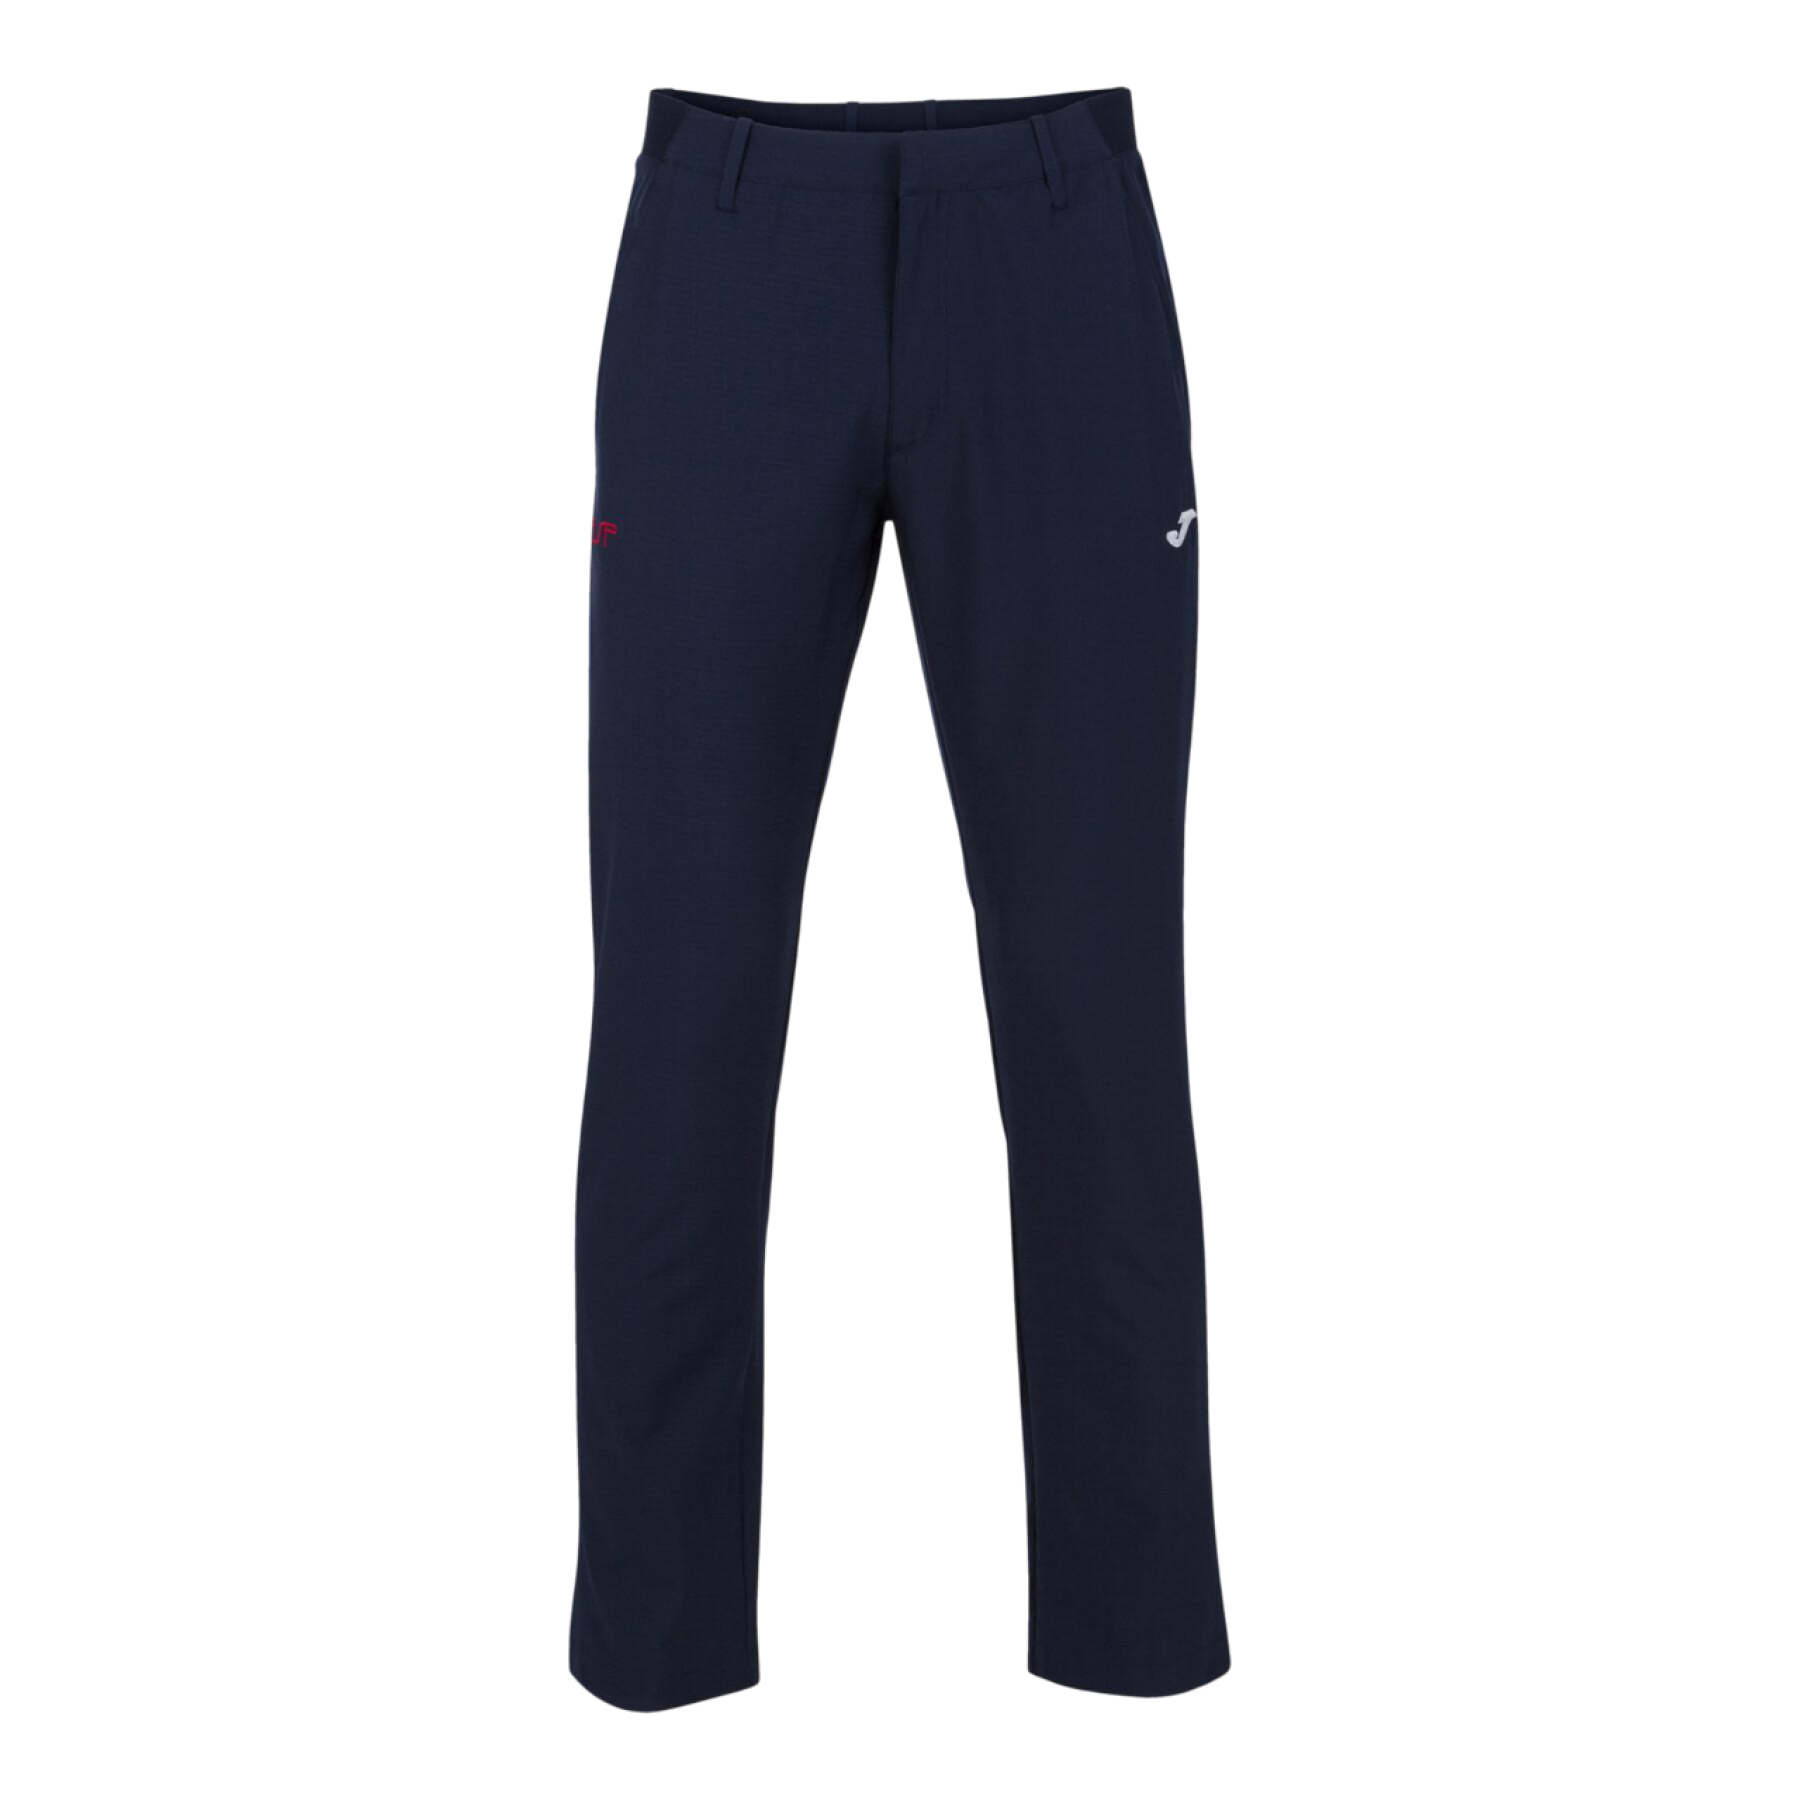 Olympic Committee sweatpants Espagne Paseo